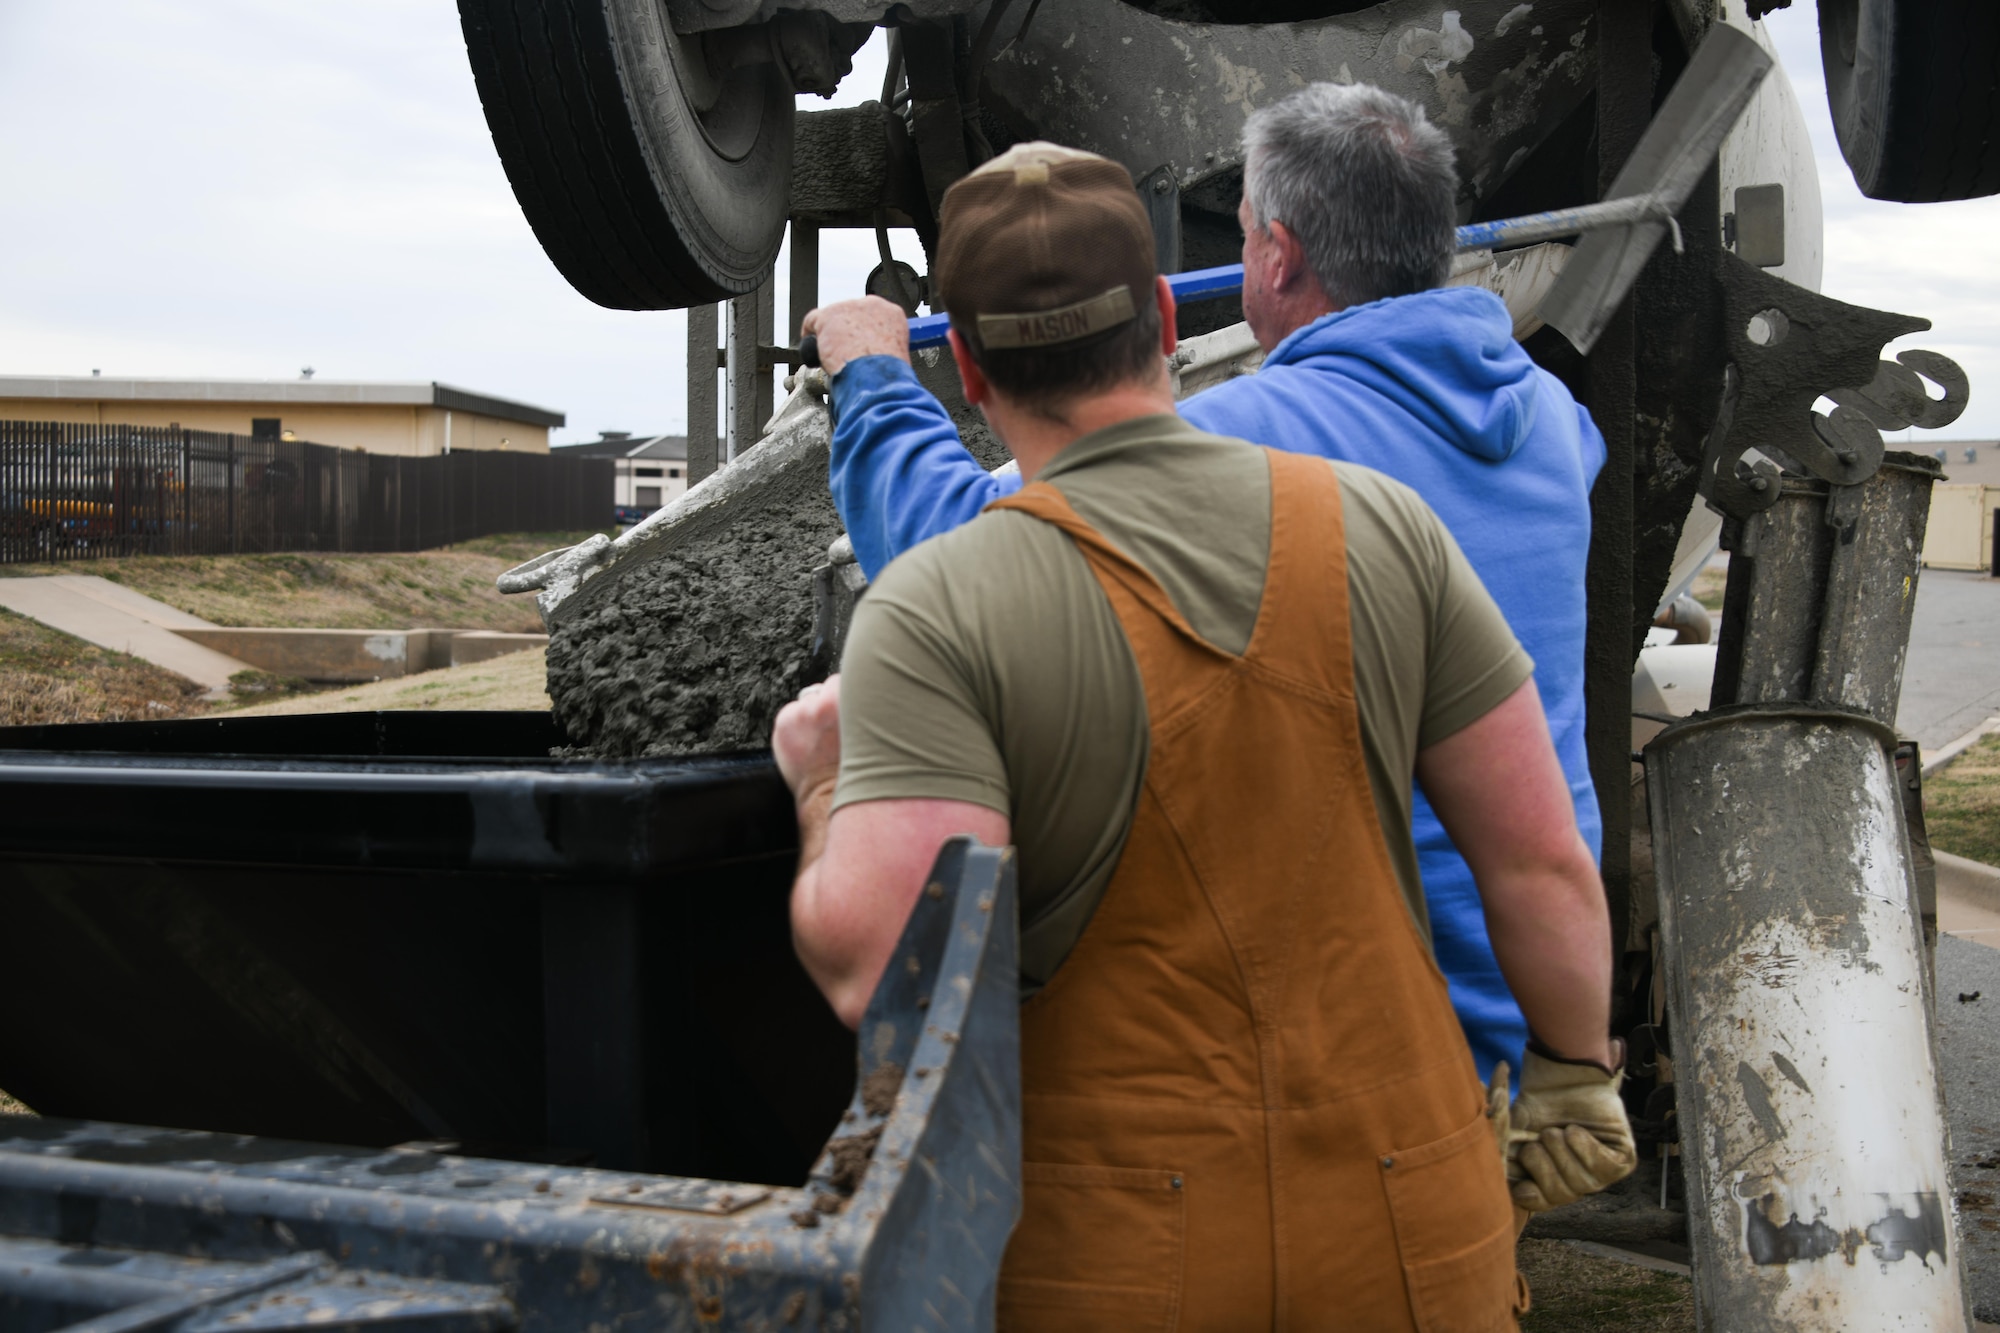 U.S. Air Force Senior Airman John Mason, 97th Civil Engineer Squadron (CES) pavement and equipment journeyman, and James Hukill, 97th CES equipment operator, load cement into a front end loader at Altus Air Force Base, Oklahoma, Feb. 22, 2023. Cement pouring is one of the many jobs Mason does as a “dirt boy.” (U.S. Air Force photo by Airman 1st Class Miyah Gray)